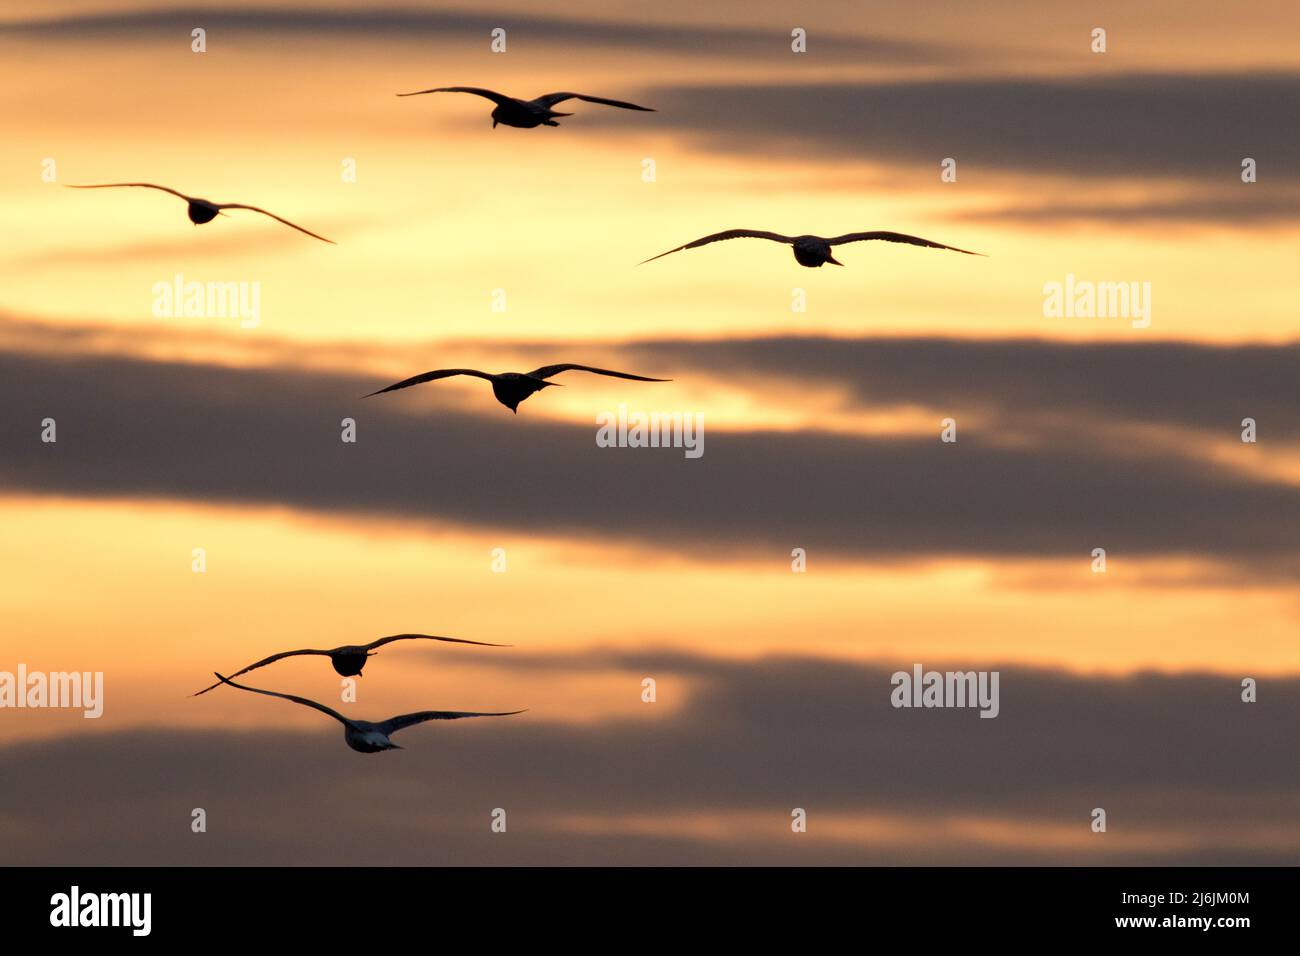 A flock of seagulls in Silhouette float in strong coastal winds over the early evening sunset sky of East Mersea, Mersea Island, Essex United Kingdom Stock Photo